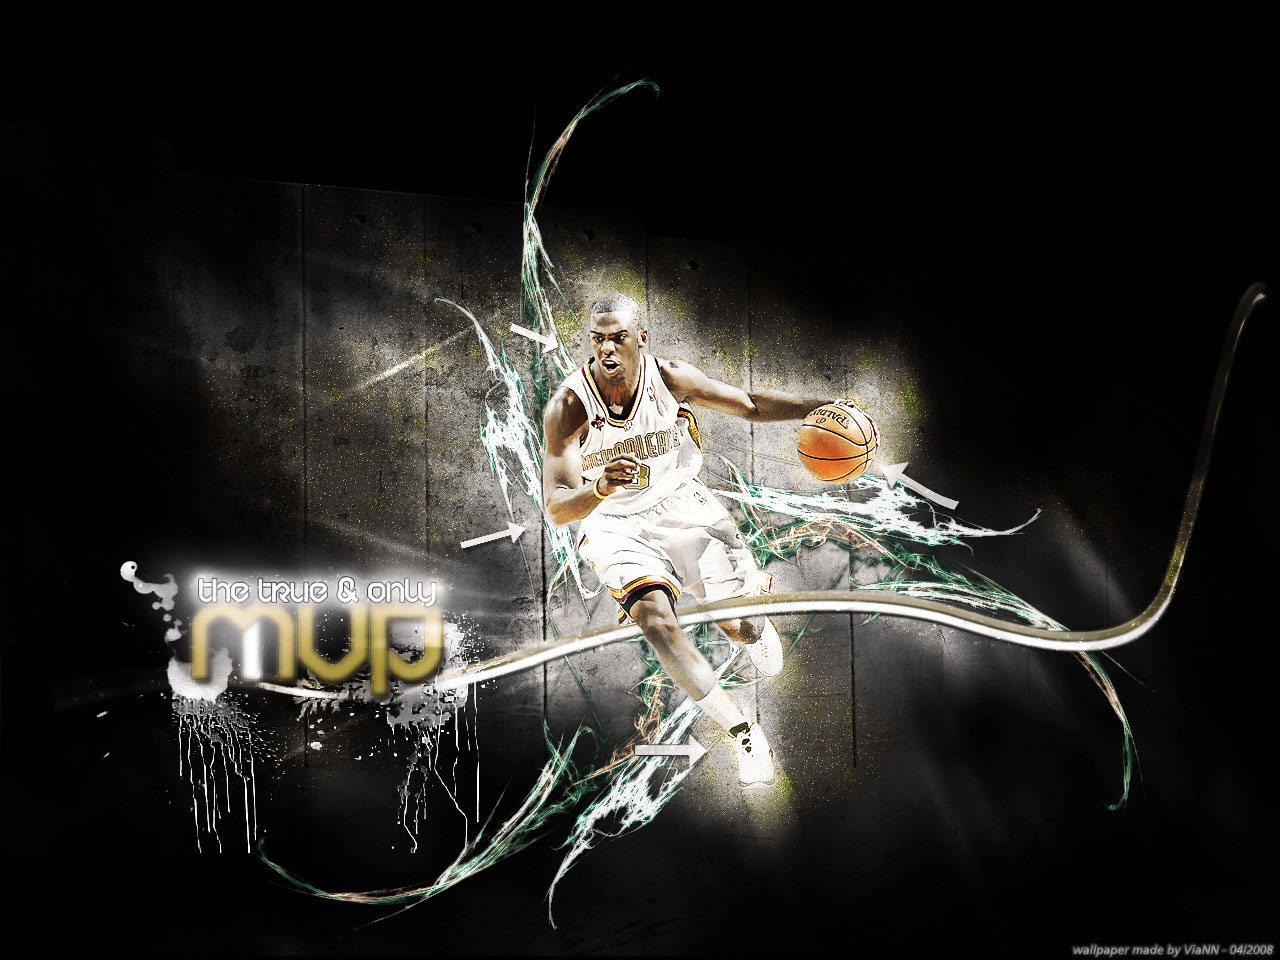 hornets wallpaper,graphic design,font,graphics,photography,darkness